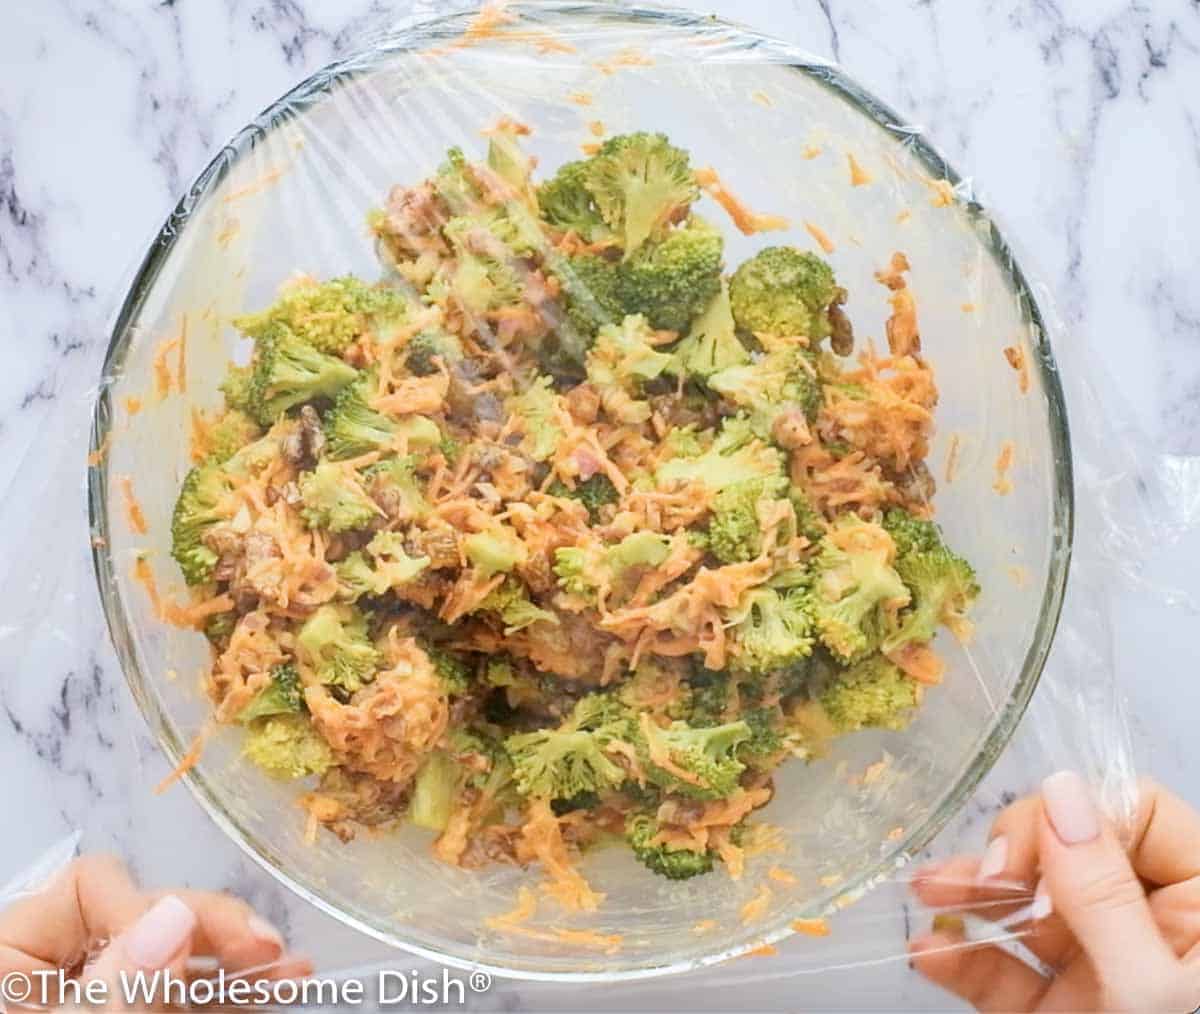 plastic wrap being placed over a large bowl of broccoli salad